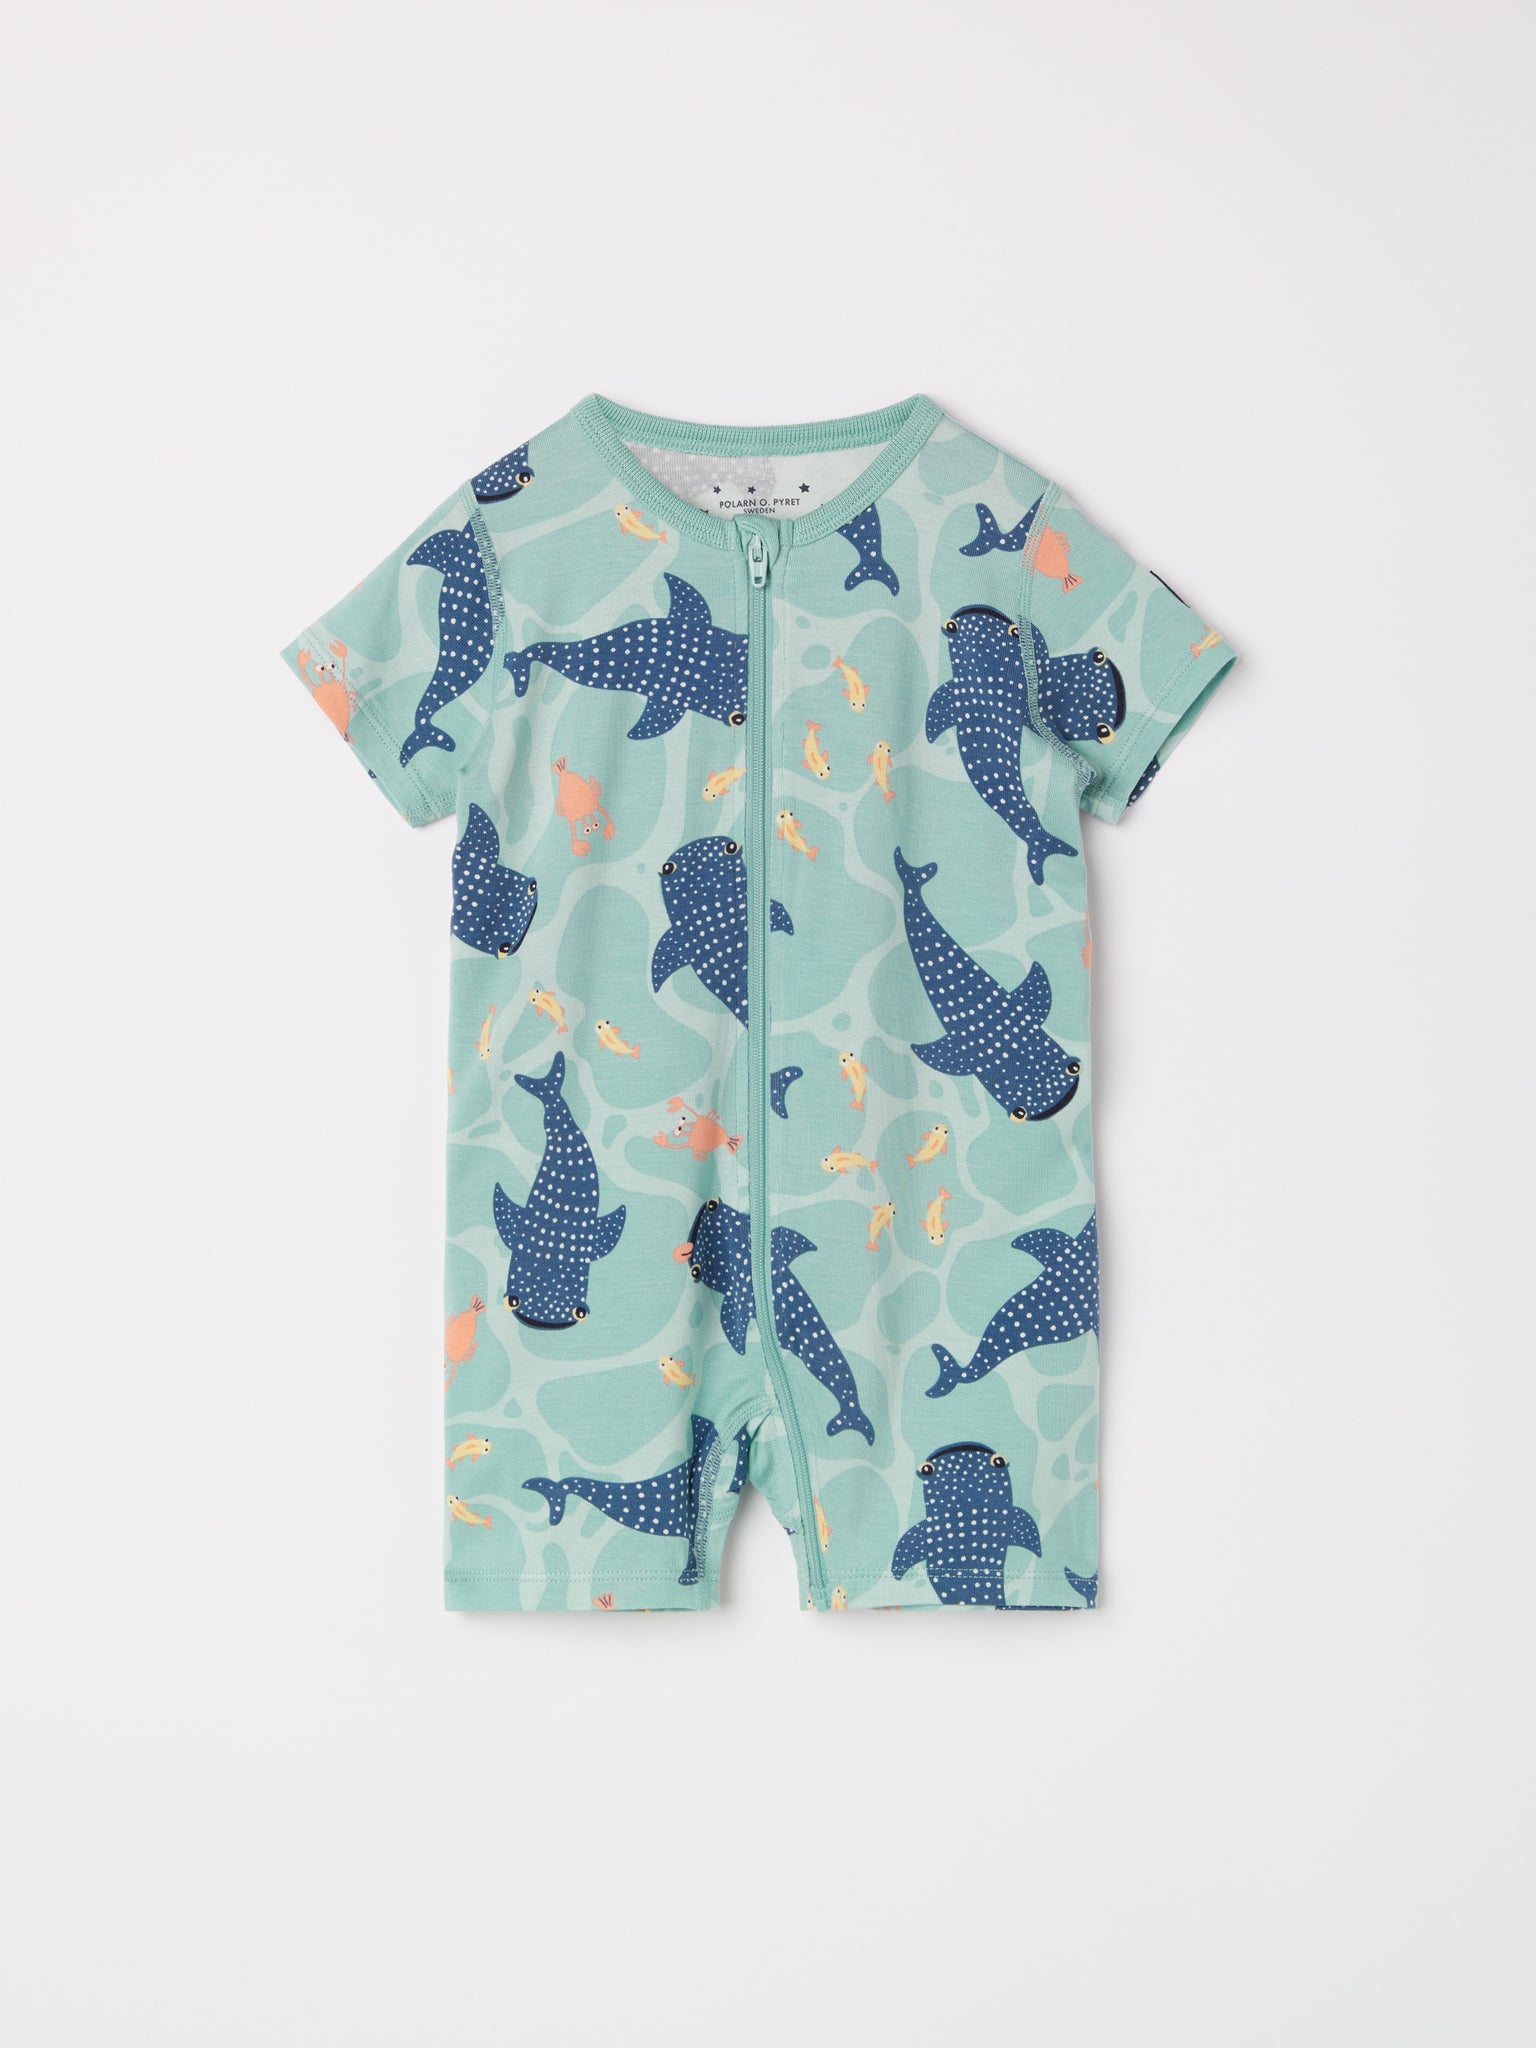 Shark Print Shortie Kids Sleepsuit from the Polarn O. Pyret kidswear collection. Ethically produced kids clothing.